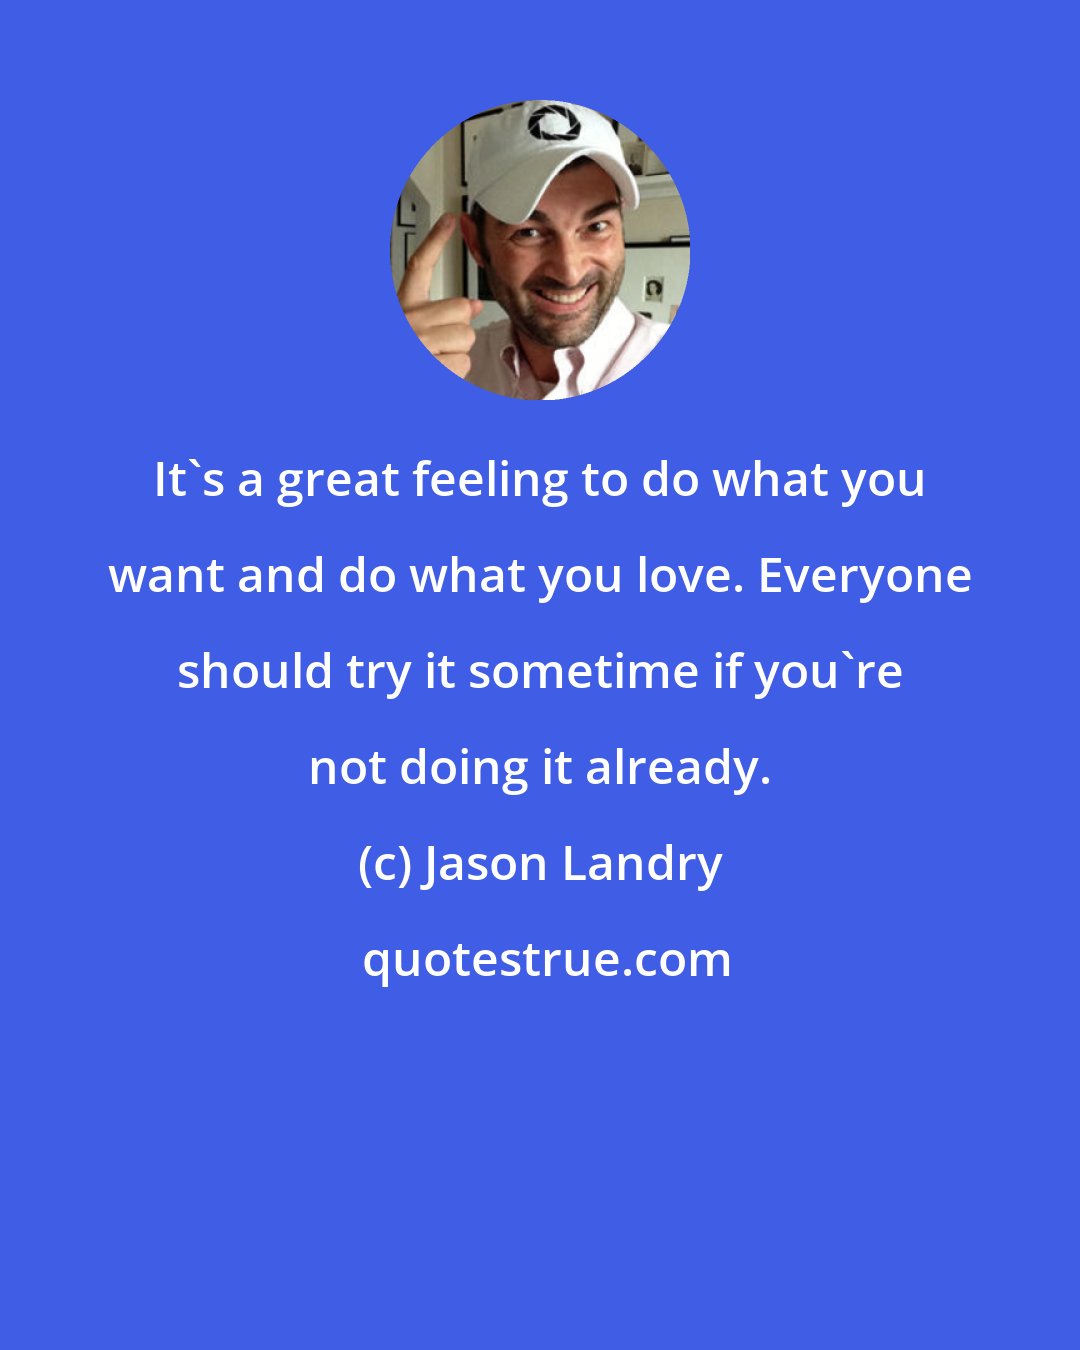 Jason Landry: It's a great feeling to do what you want and do what you love. Everyone should try it sometime if you're not doing it already.